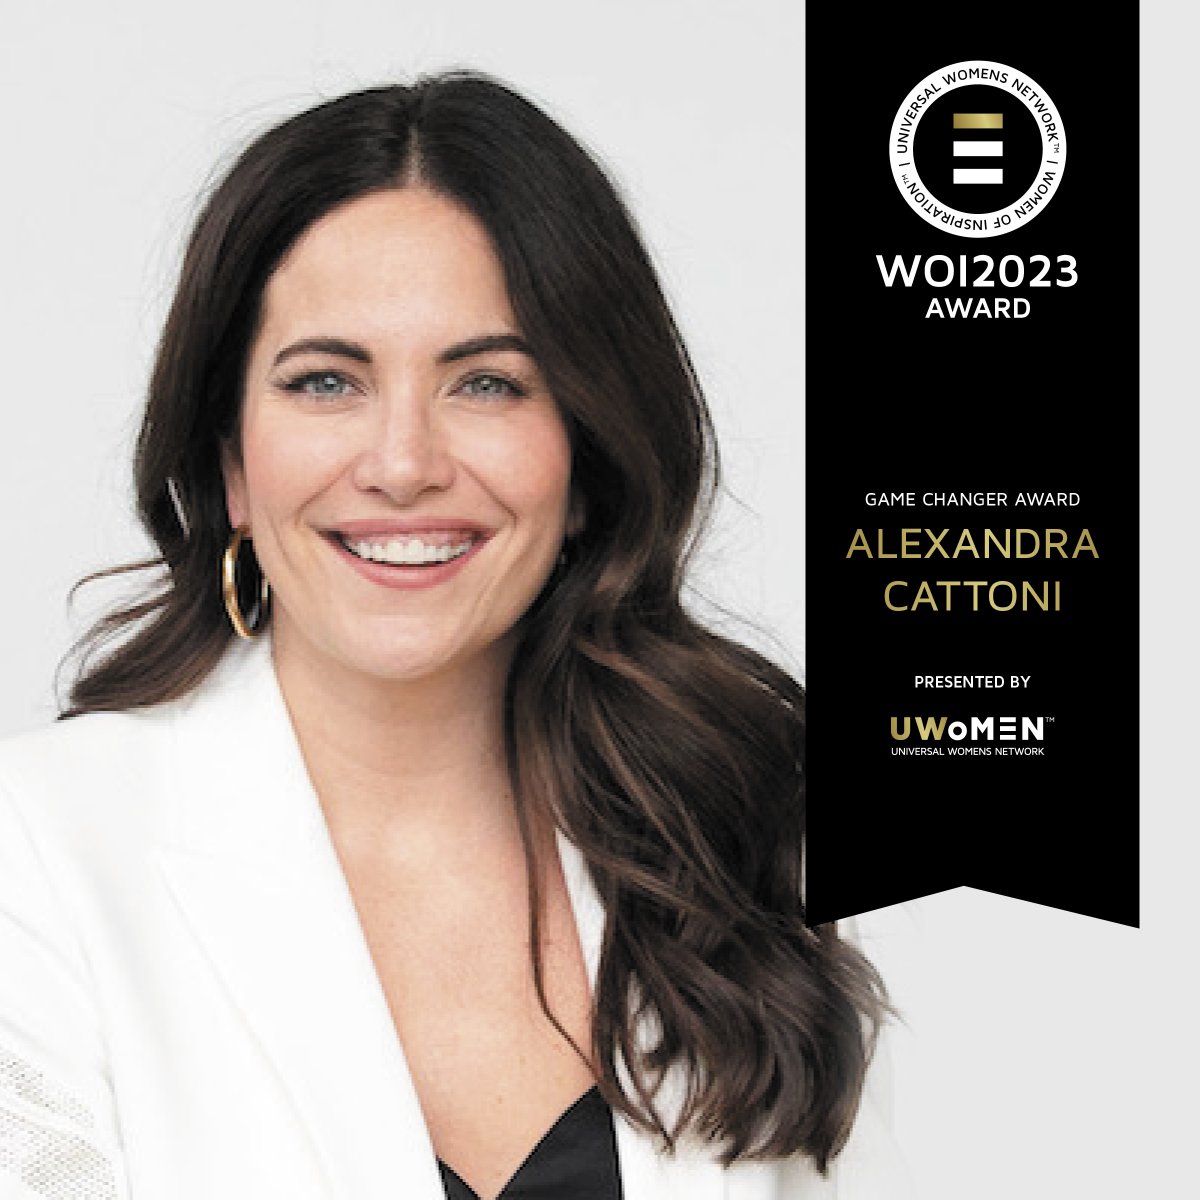 Congratulations Alexandra Cattoni - 2023 Women of Inspiration™ Game Changer Award. Learn more about Alexandra Cattoni - buff.ly/3VPx2GQ #WOI2023Inspirechange #womenofinspiration